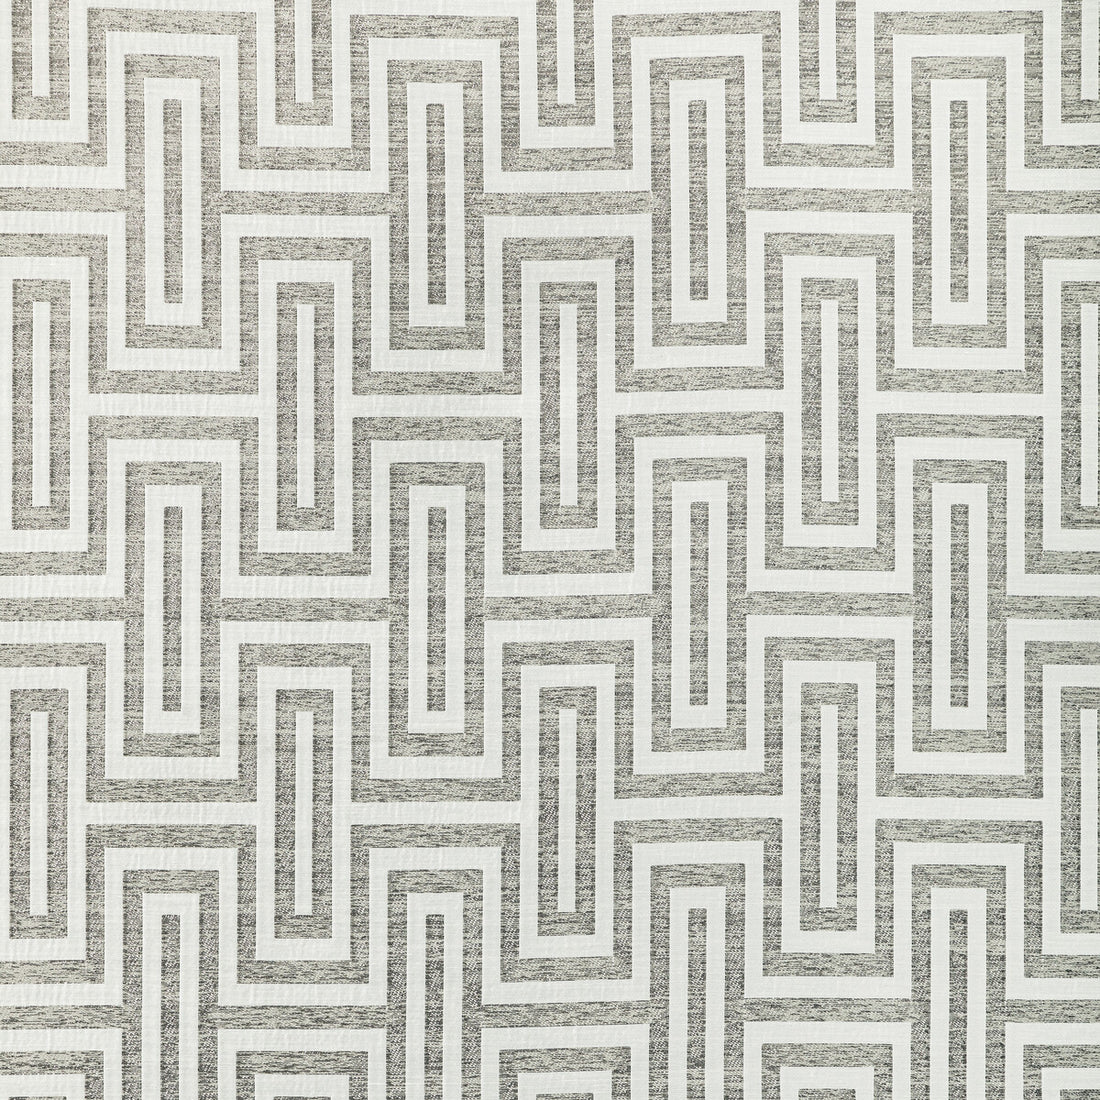 Geo Glam fabric in ivory platinum color - pattern 36340.16.0 - by Kravet Couture in the Modern Luxe III collection